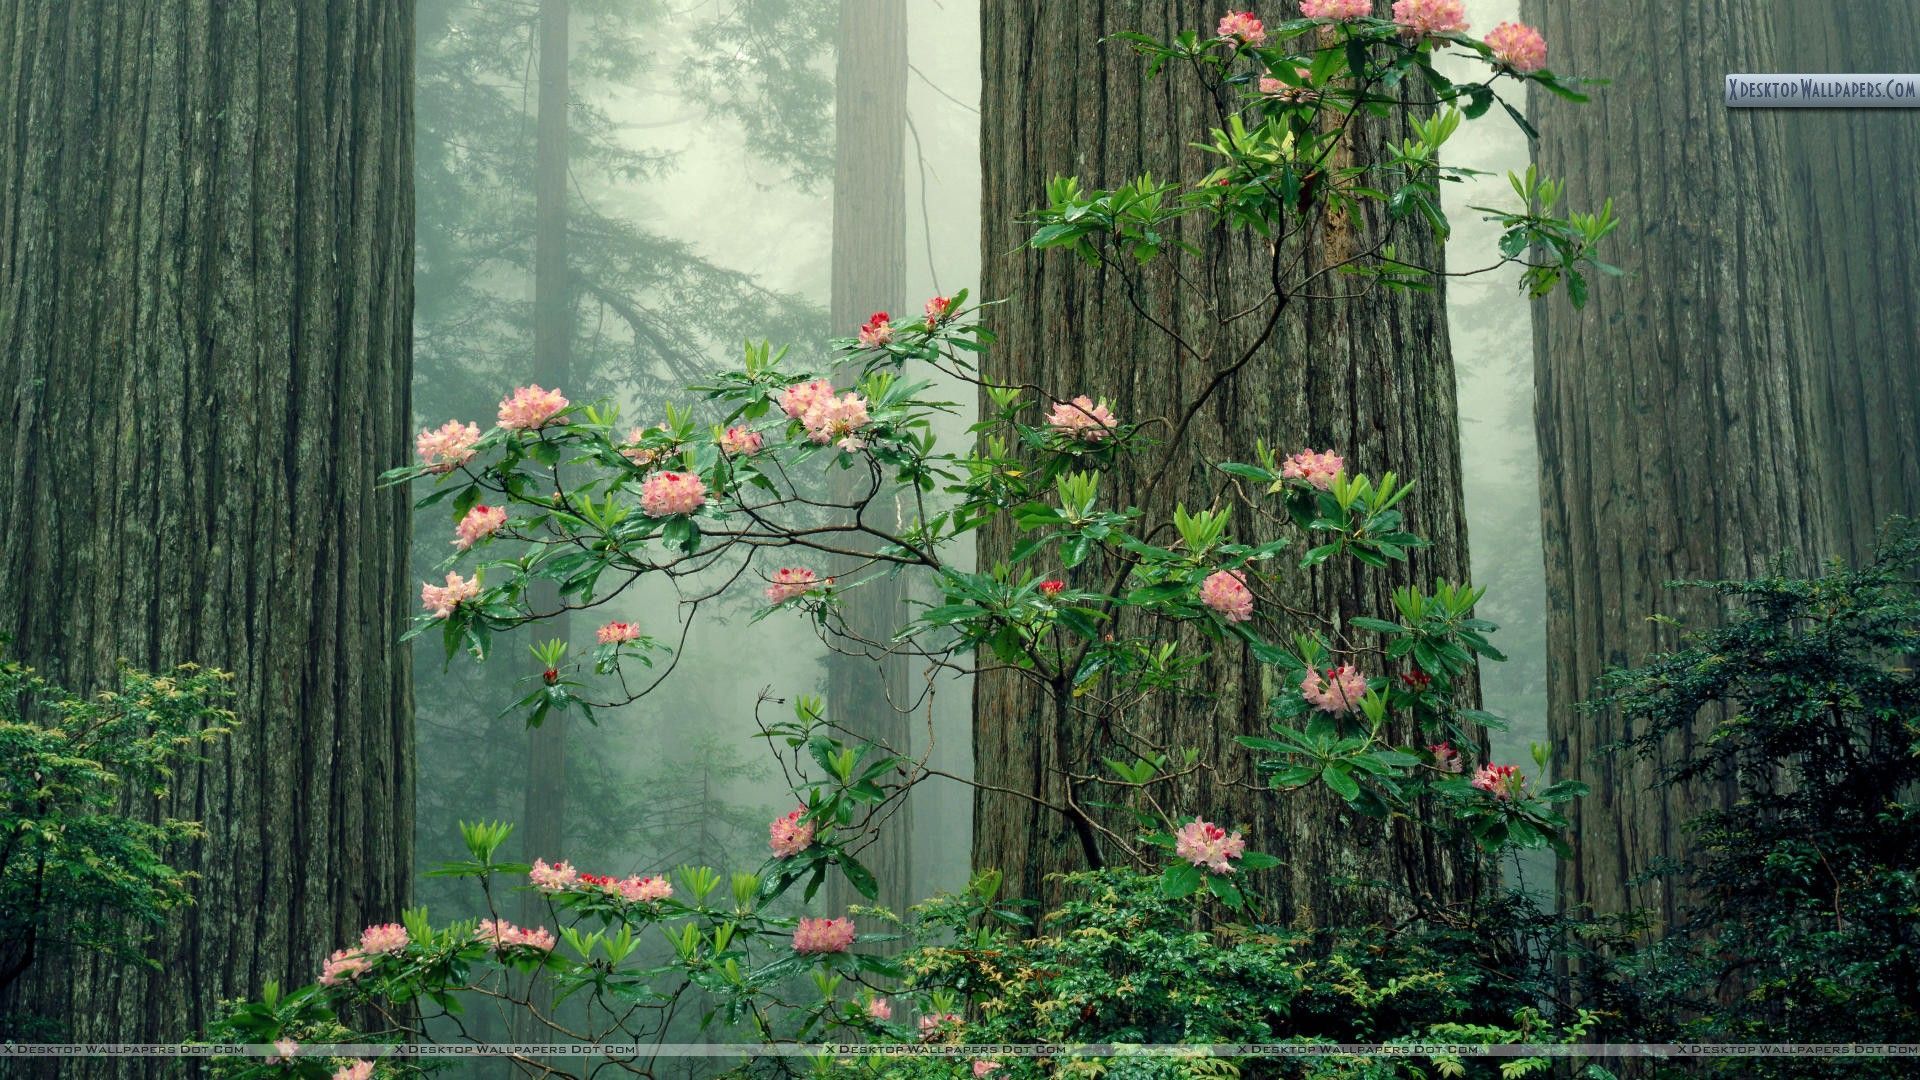 Redwood National Park. Rhododendrons in Bloom, Redwood National